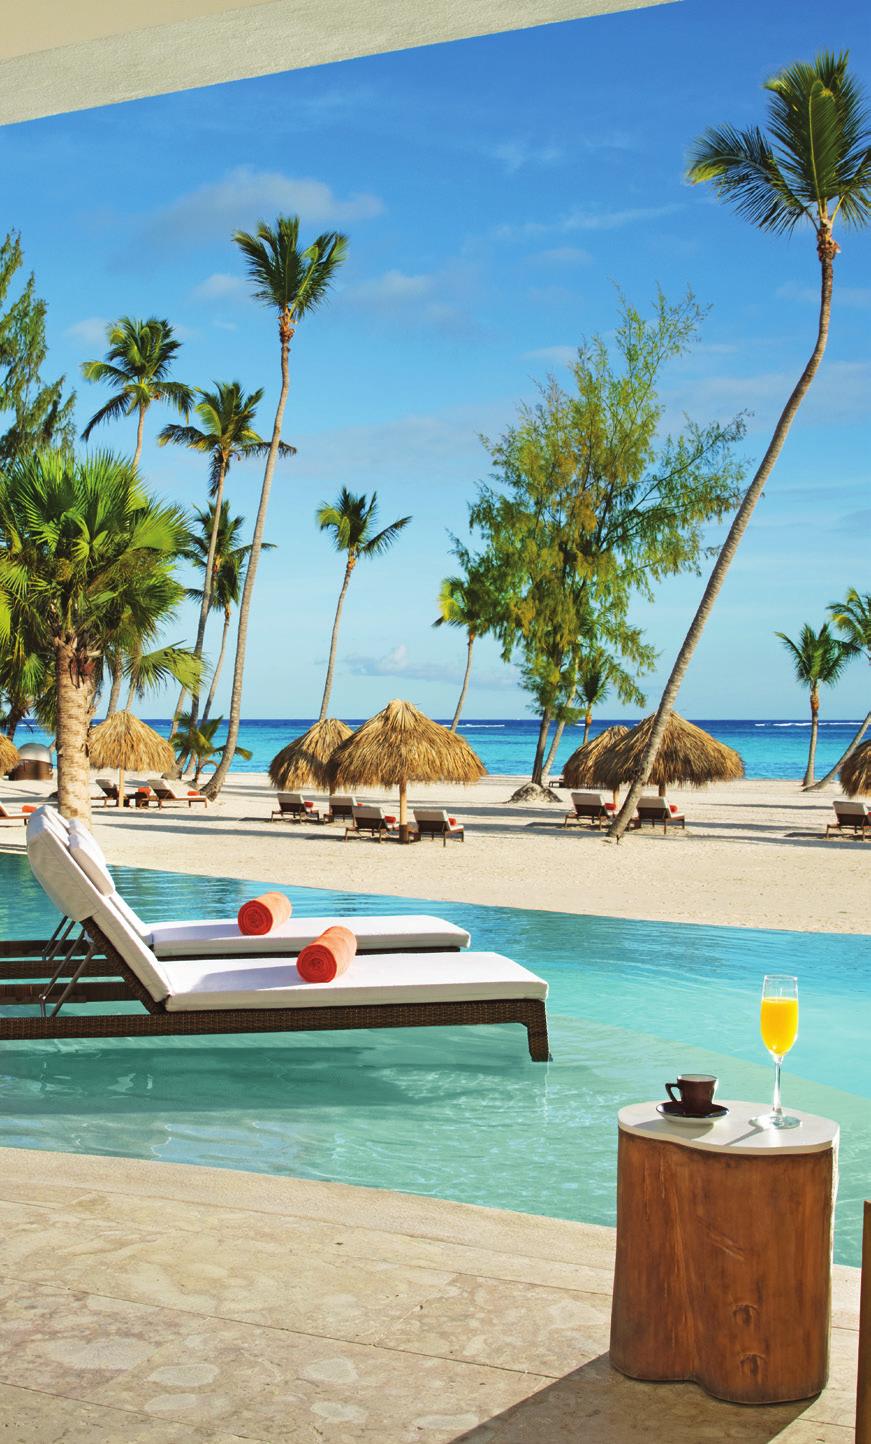 BEST KEPT SECRETS Nestled on the eastern shore of the Dominican Republic is one of the Caribbean